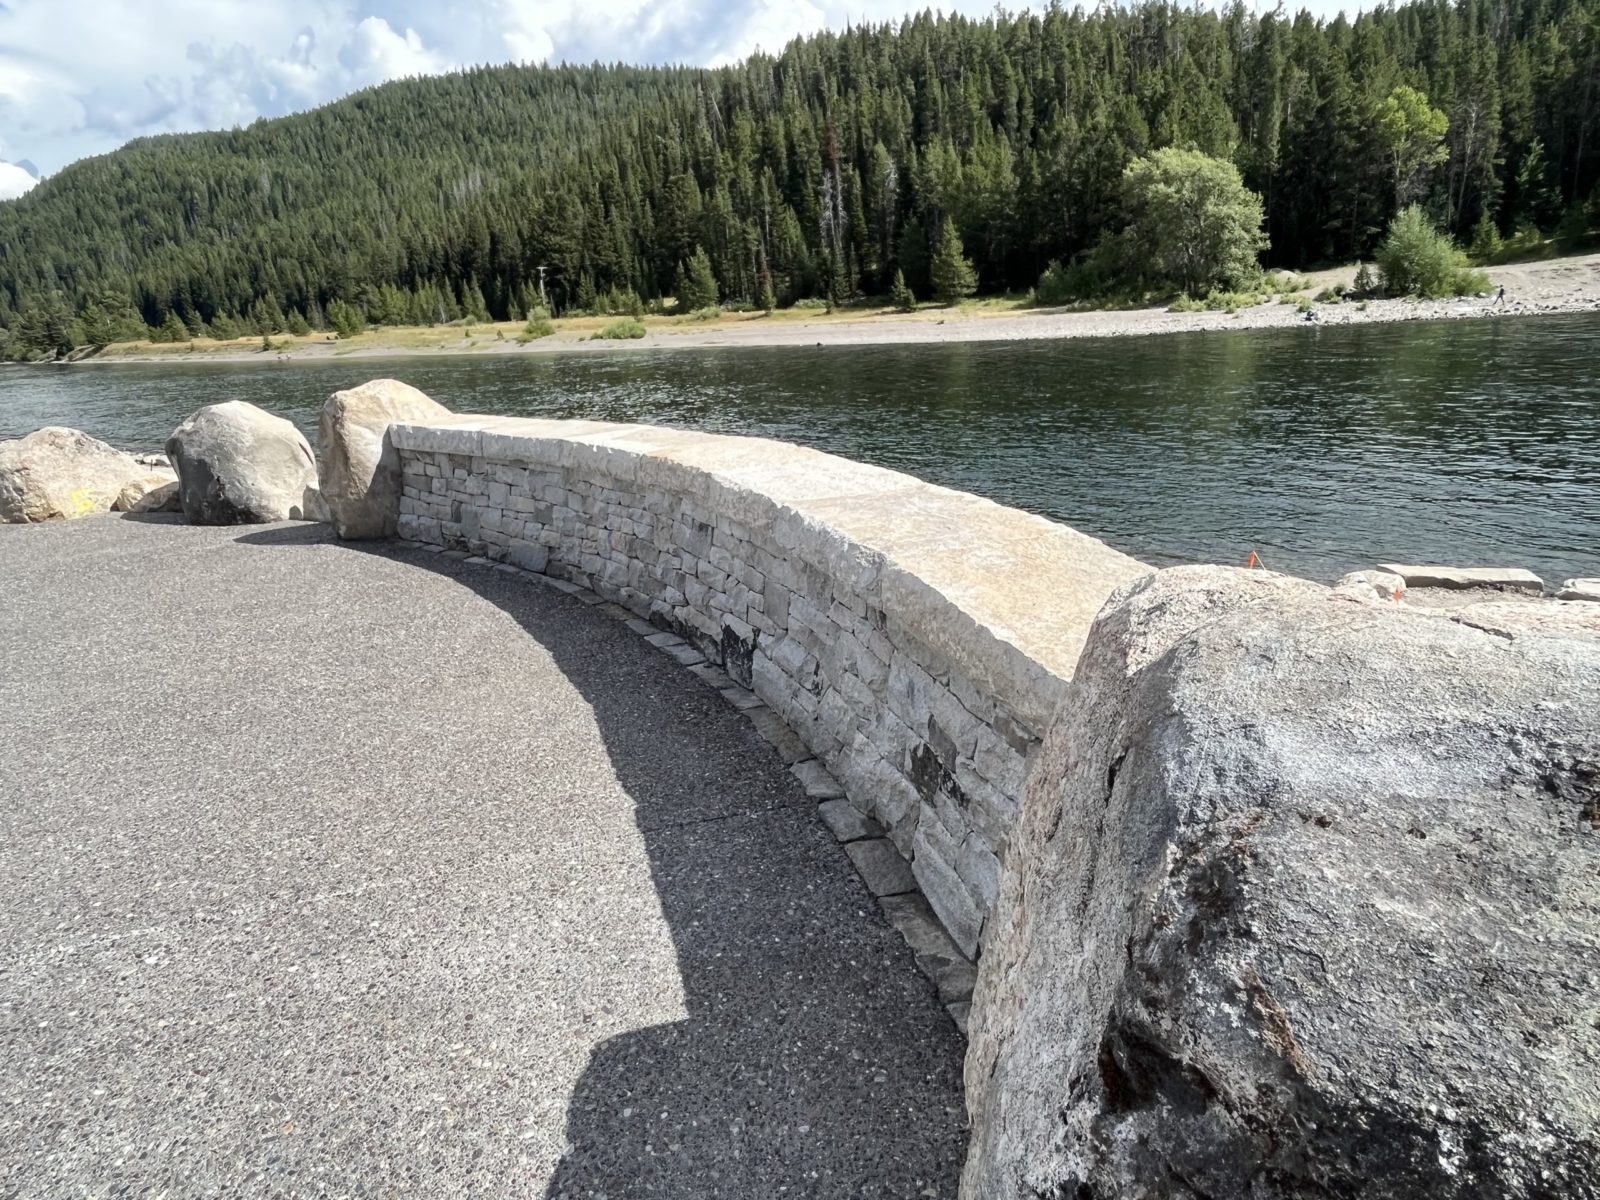 A dry-stack stone wall, similar to those at Pacific Creek and Jenny Lake, was built earlier this summer to create the overlook.